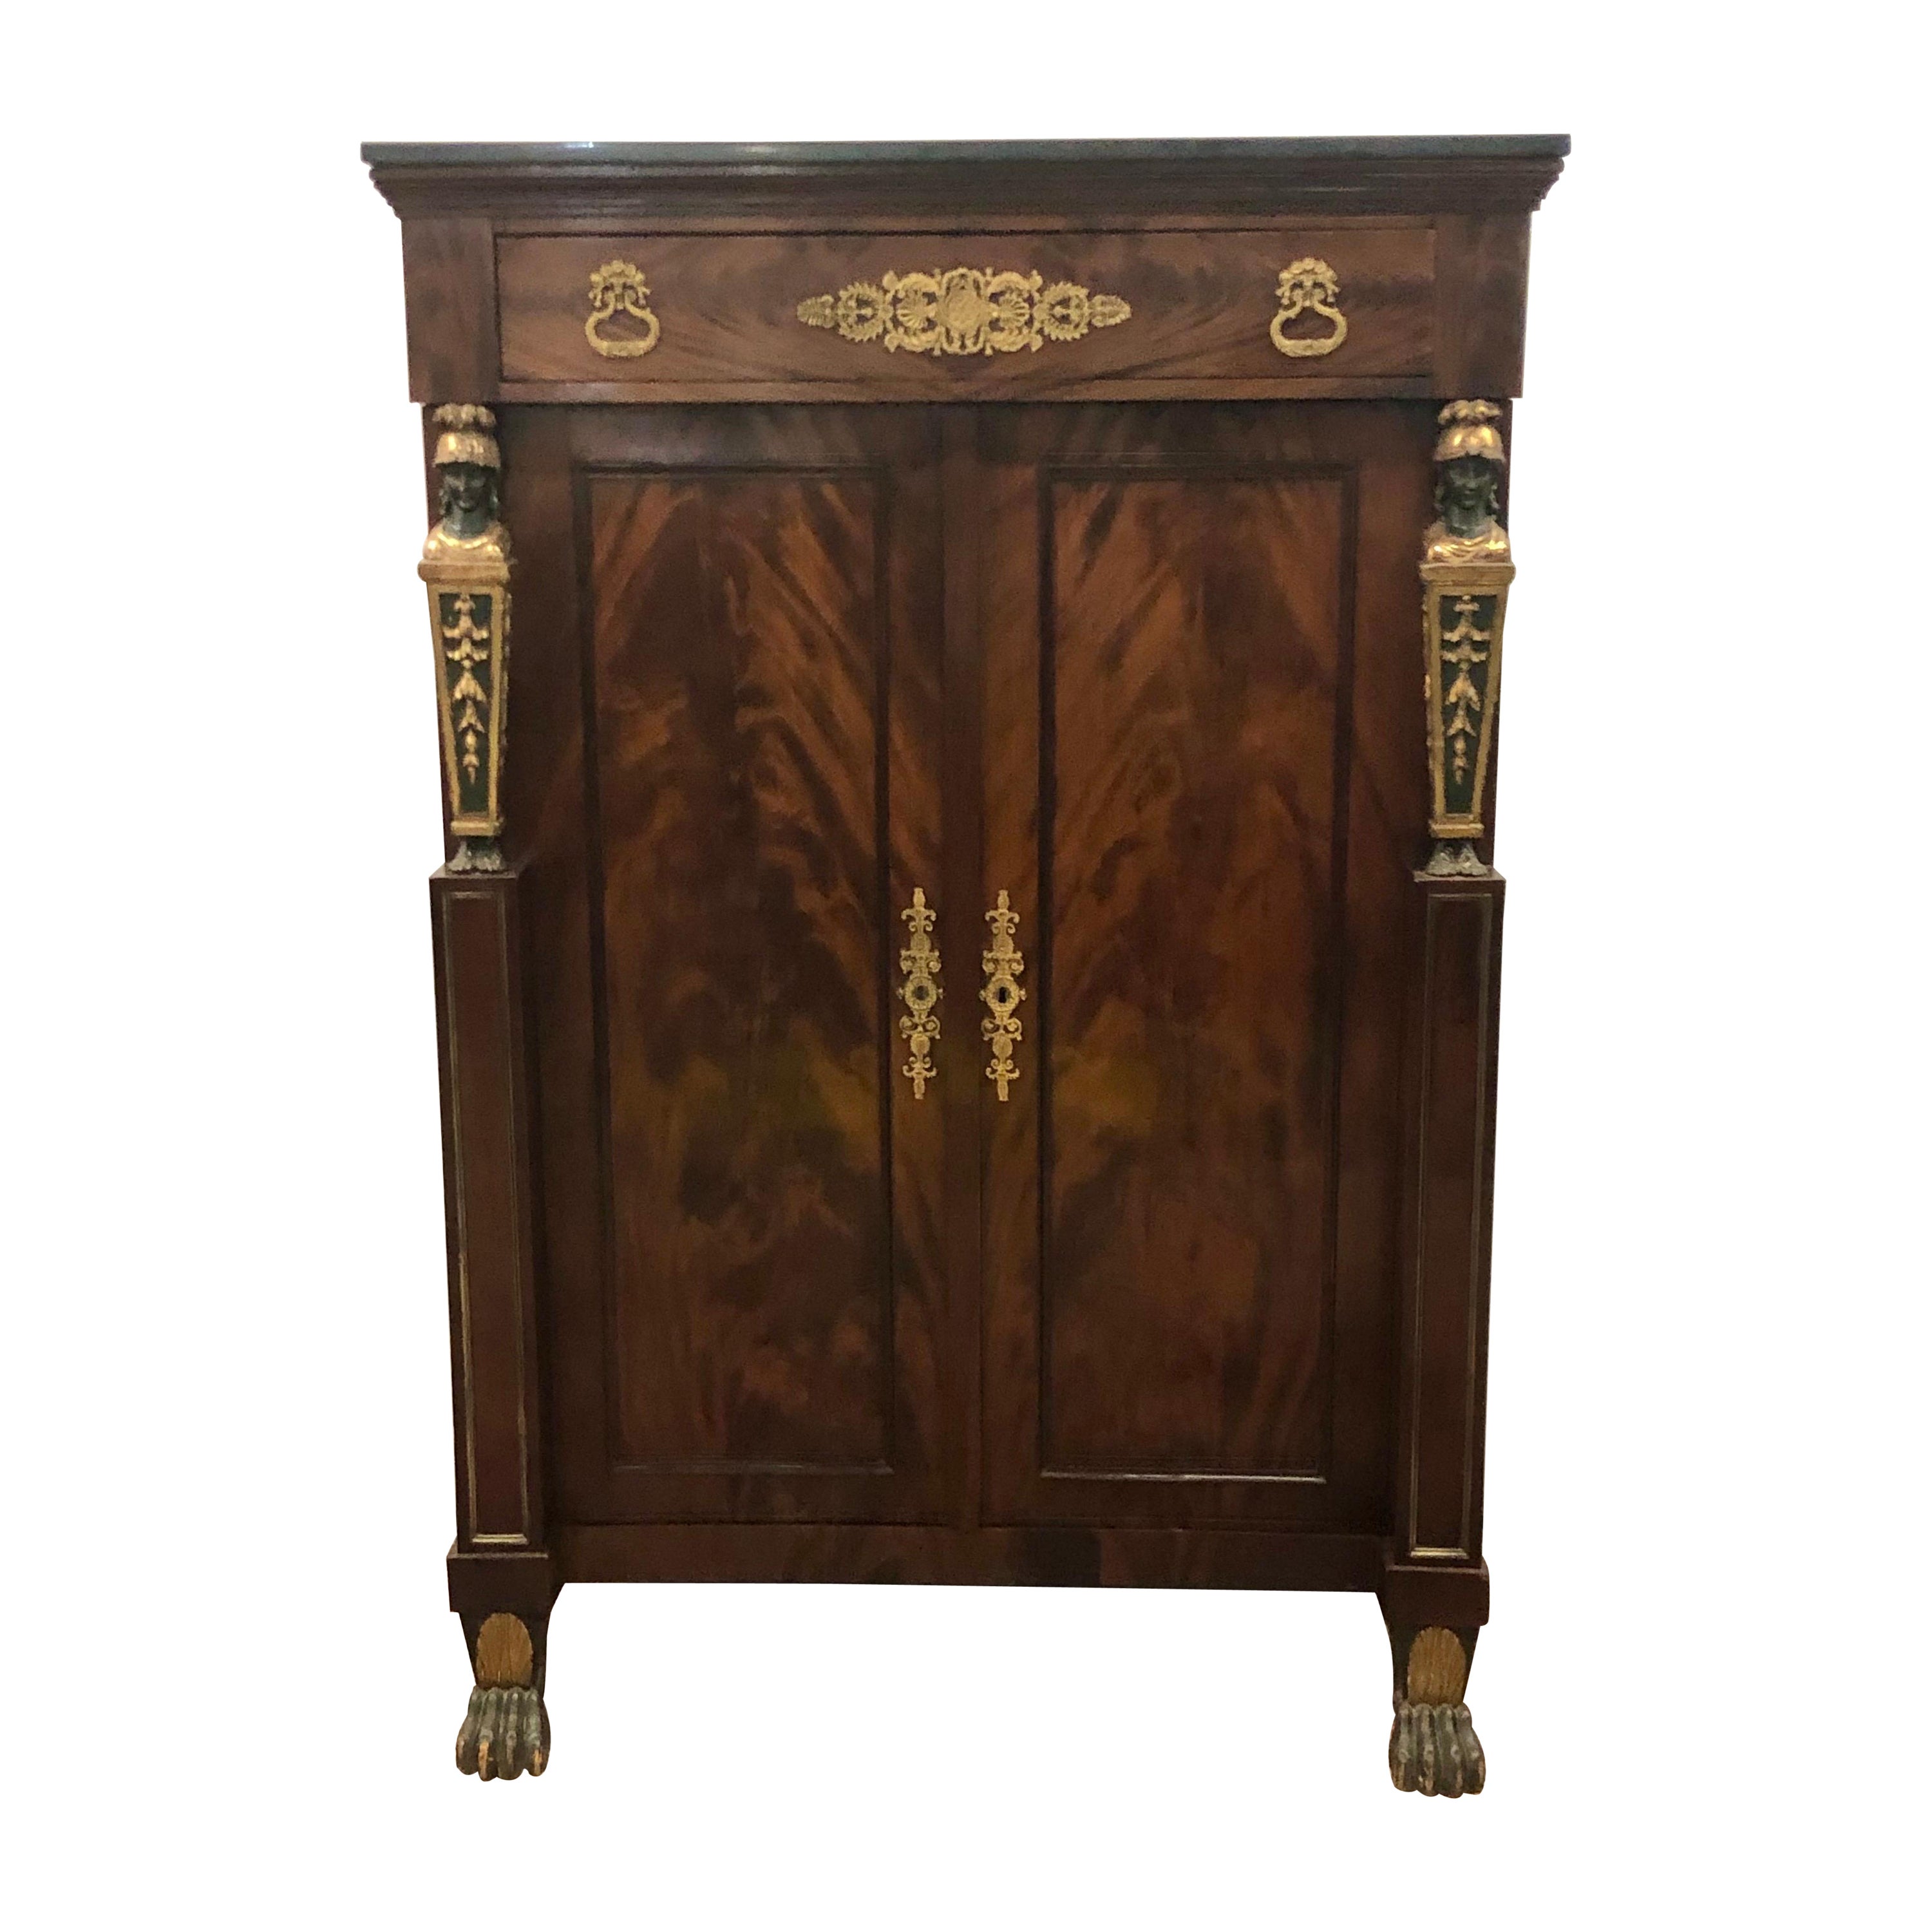 French Empire Gentleman's Cabinet / Chest with Soldier Motifs 19th Century